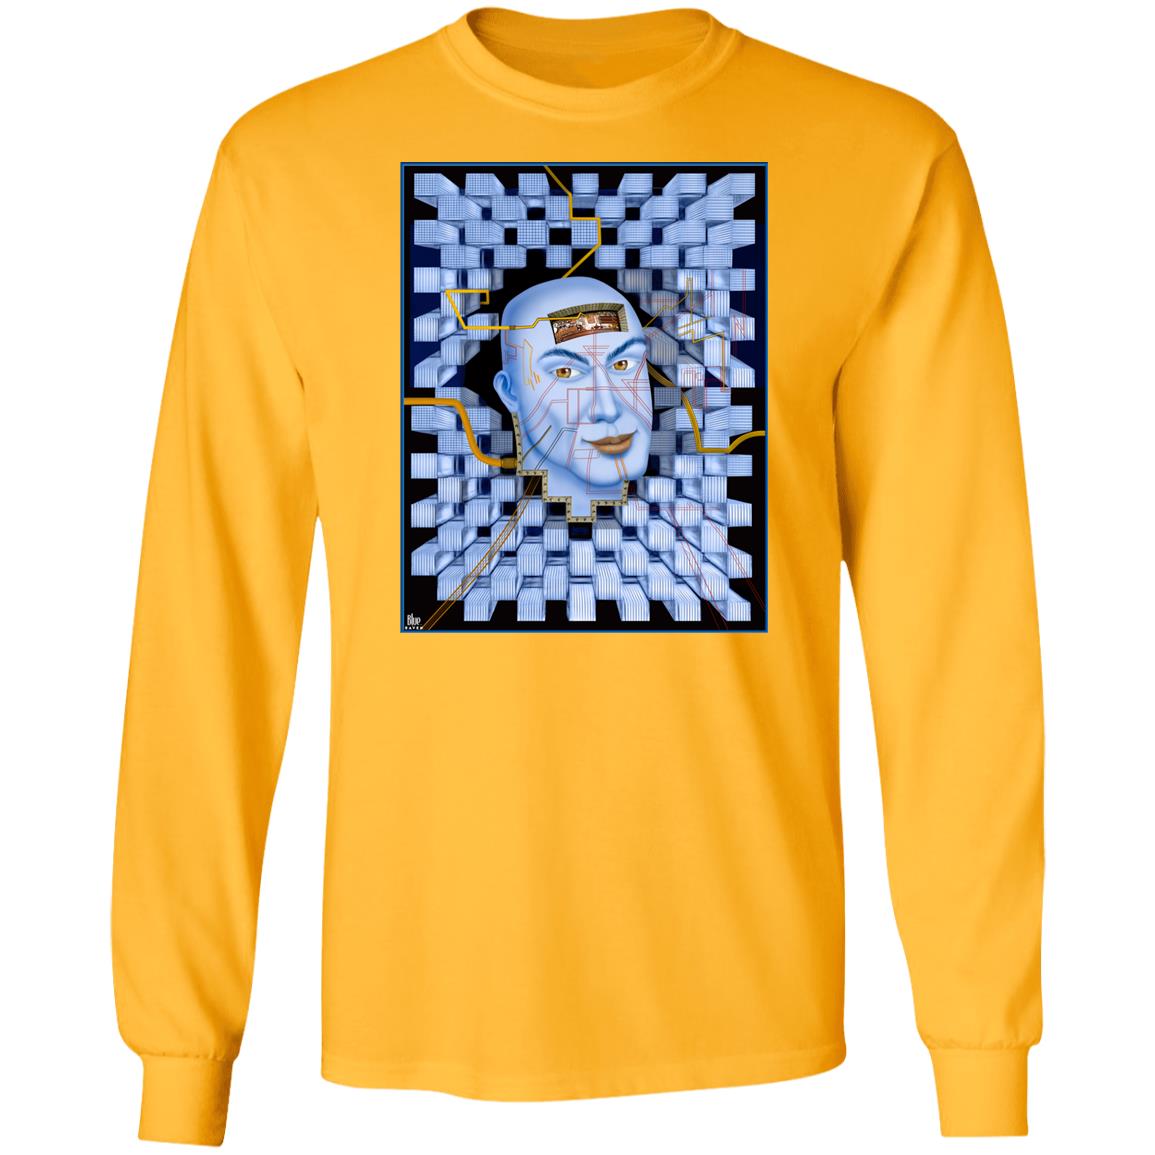 Plugged In - Men's Long Sleeve T-Shirt